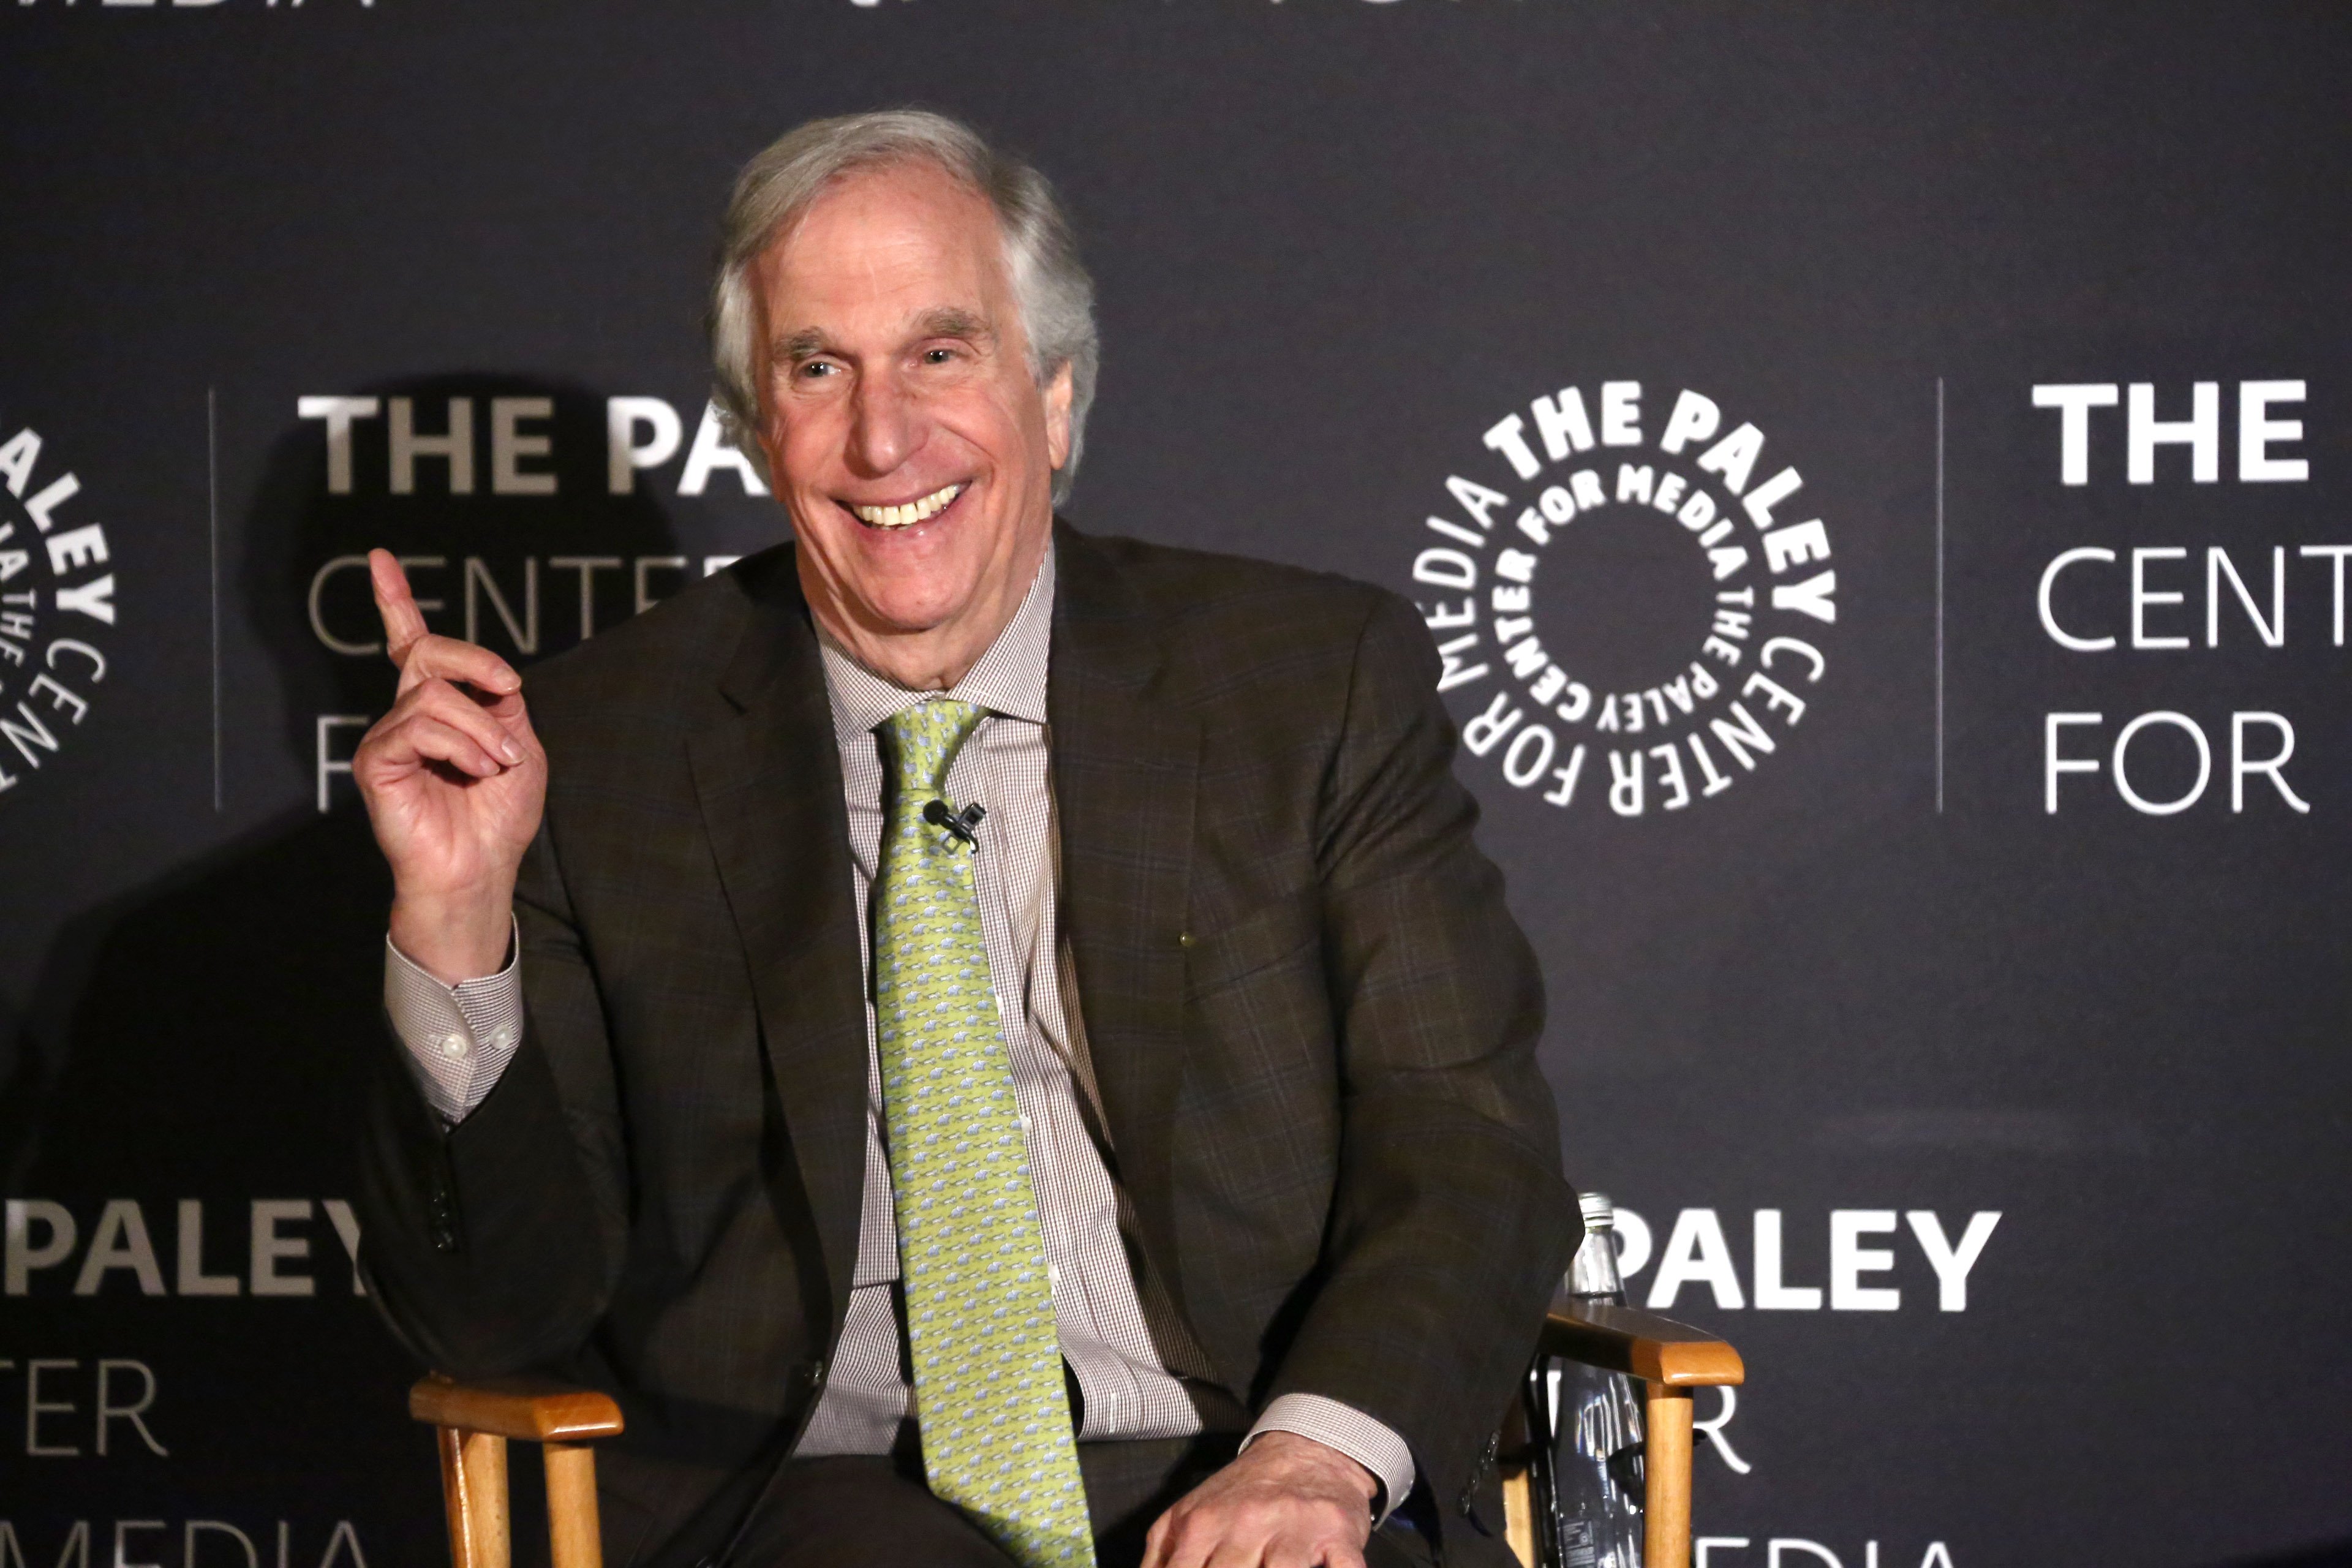  Henry Winkler attends "The Paley Center For Media Presents An Evening With Henry Winkler" at the Beverly Wilshire Four Seasons Hotel on February 12, 2020 in Beverly Hills, California. | Source: Getty Images